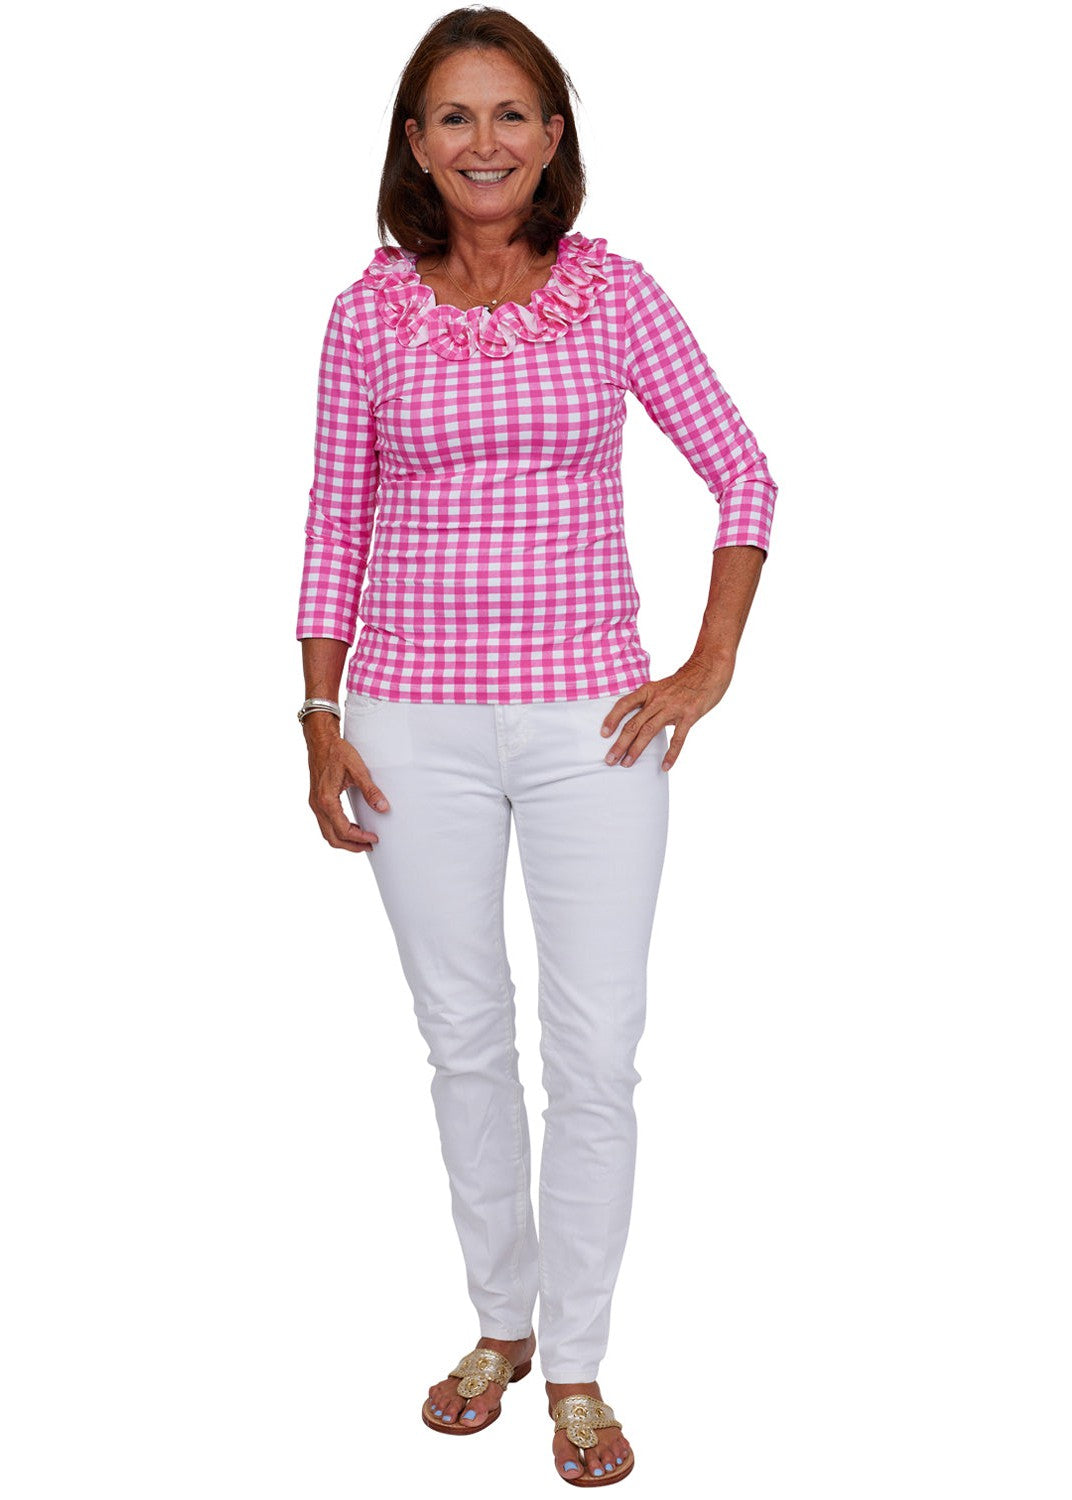 Cricket Top 3/4- Gingham Check Pink